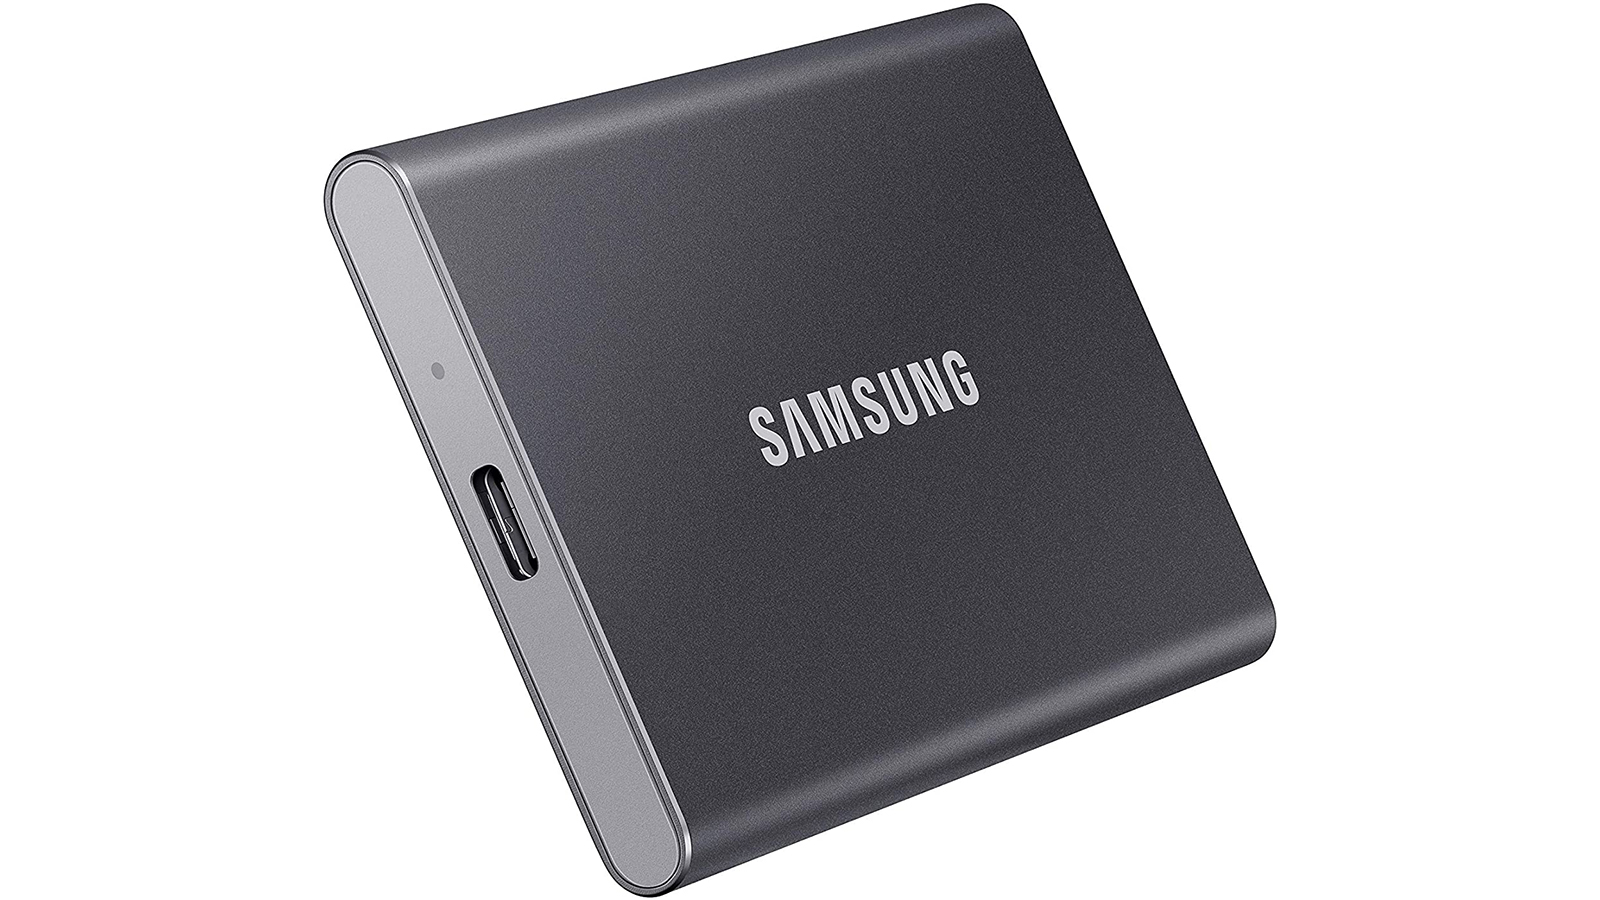 Samsung T7 SSD review: a super-fast, go-anywhere external hard drive